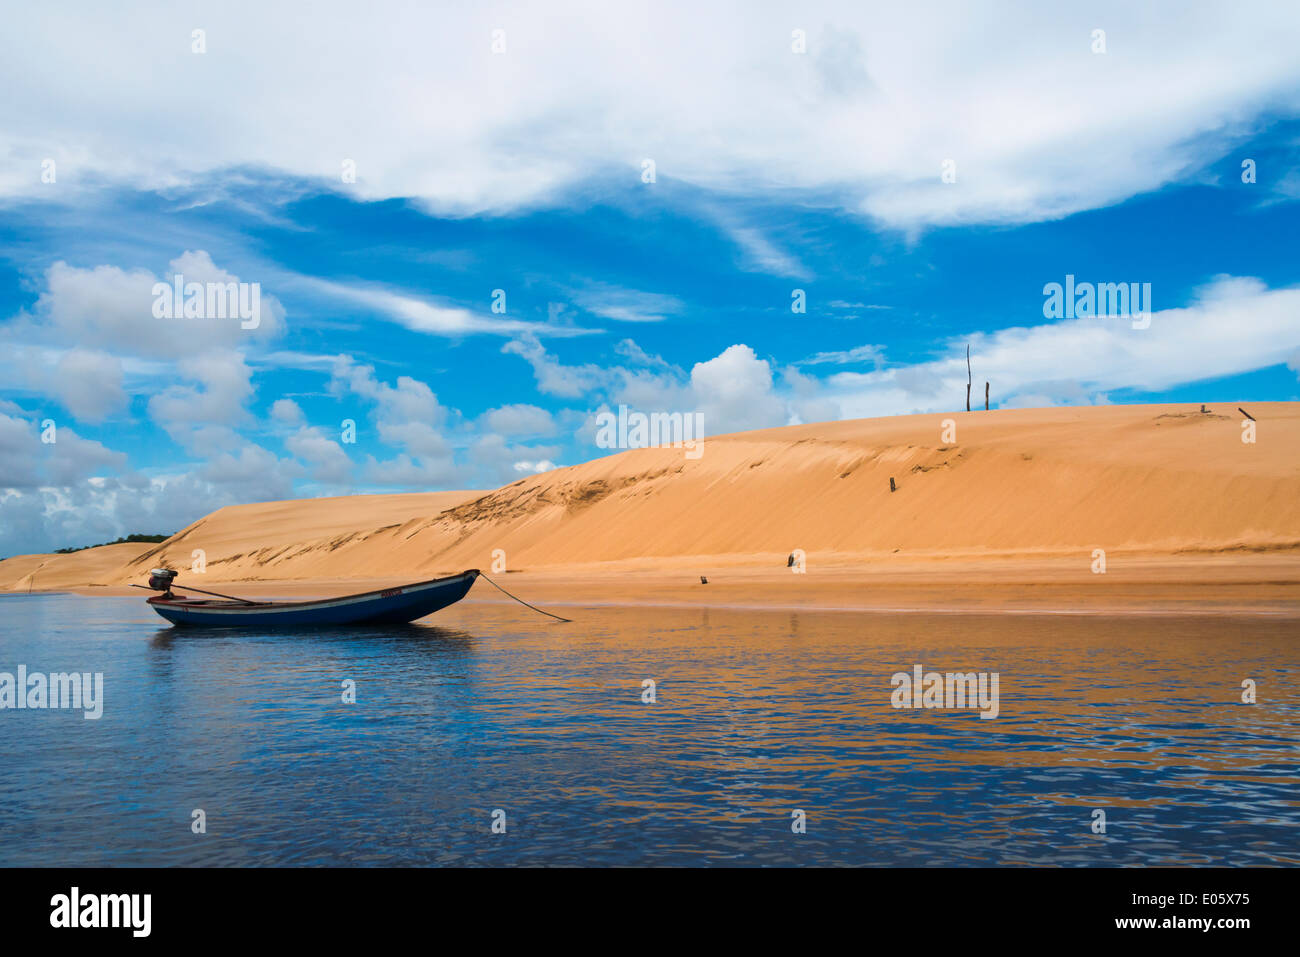 Boat and sand dune along the Preguicas River, Maranhao State, Brazil Stock Photo